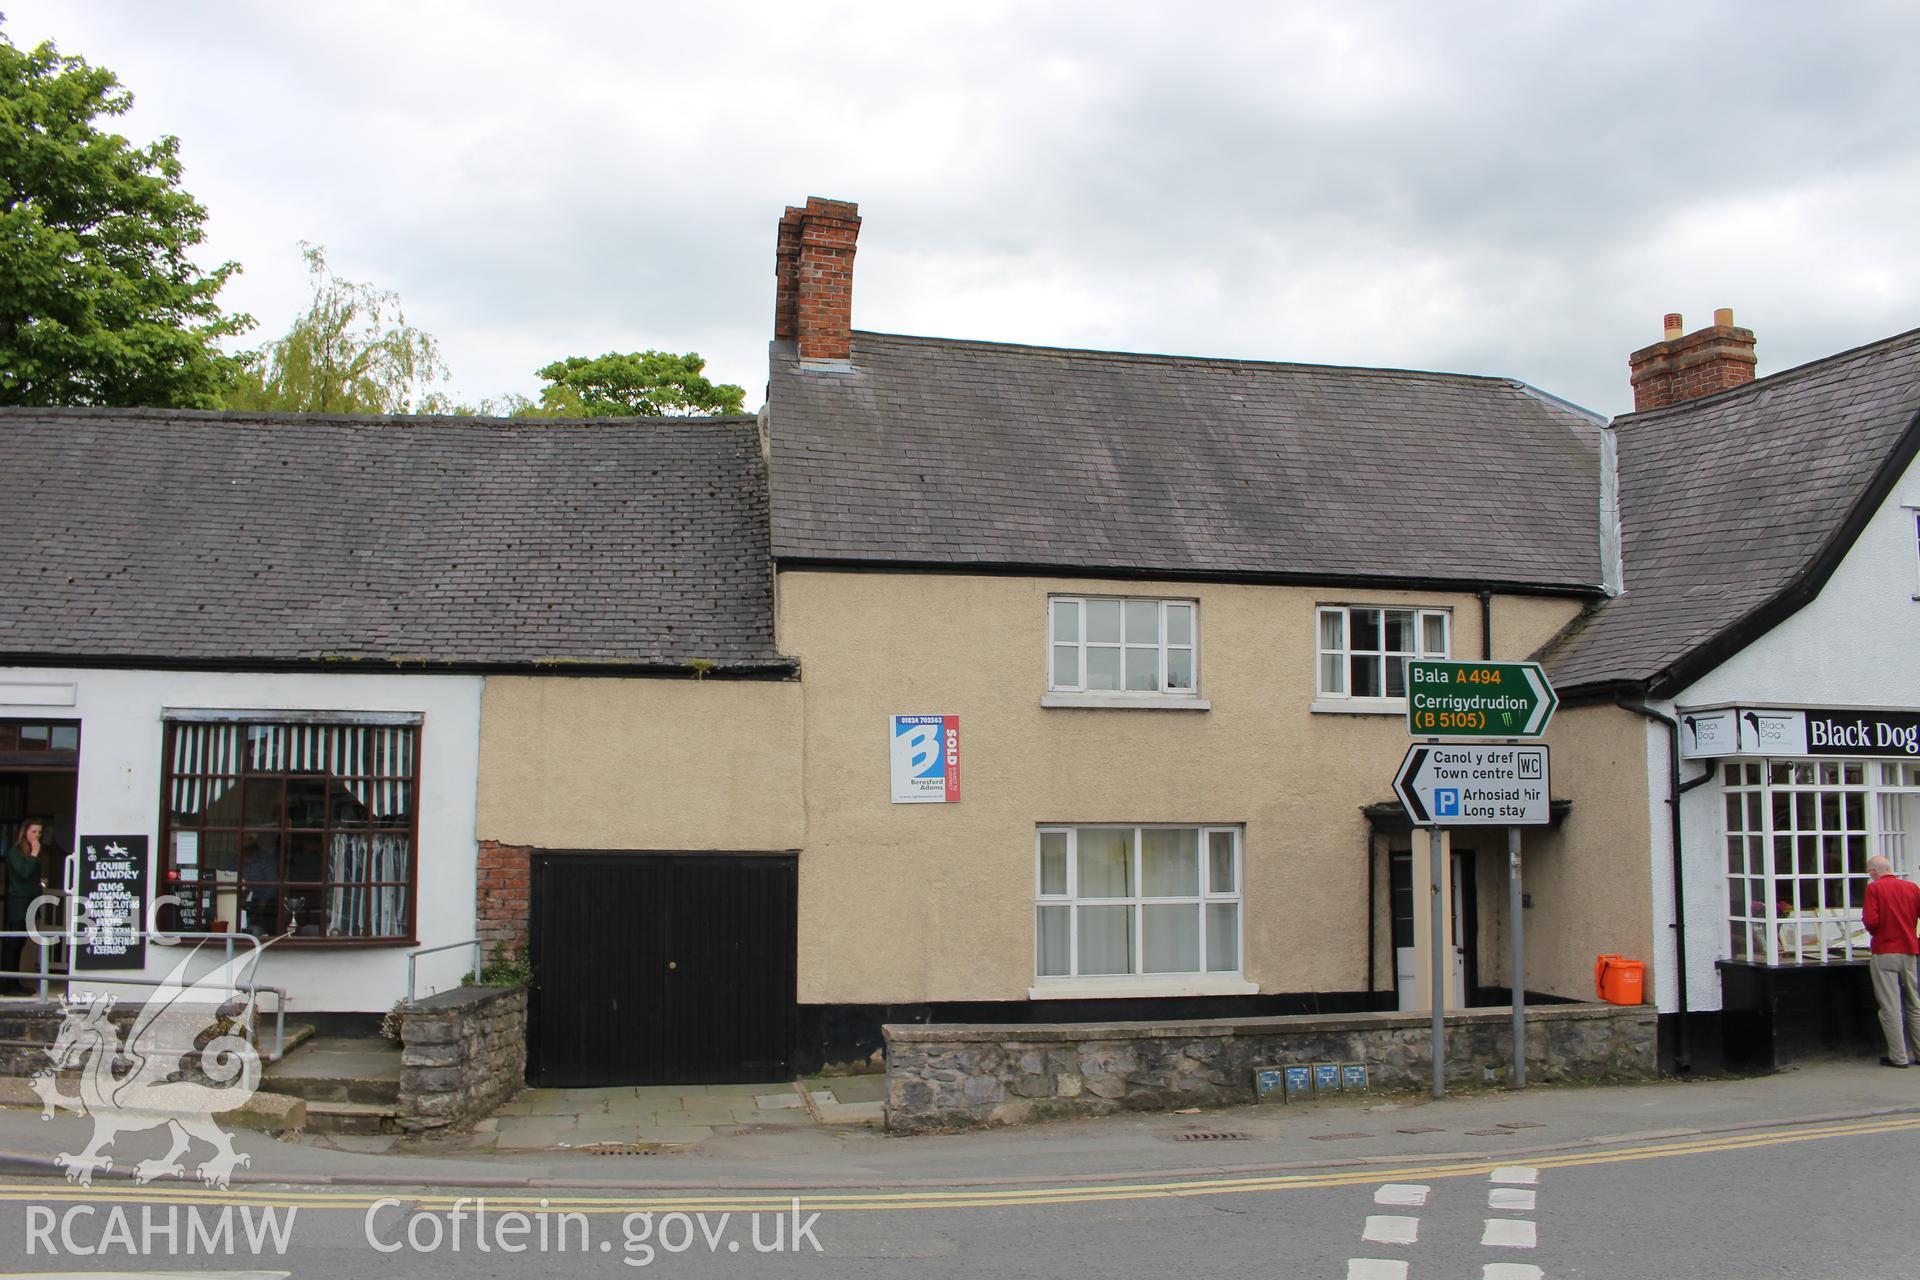 Colour photograph showing exterior view of 3, 5 and 7 Mwrog Street, Ruthin. Photographed during survey conducted by Geoff Ward on 14th May 2014.